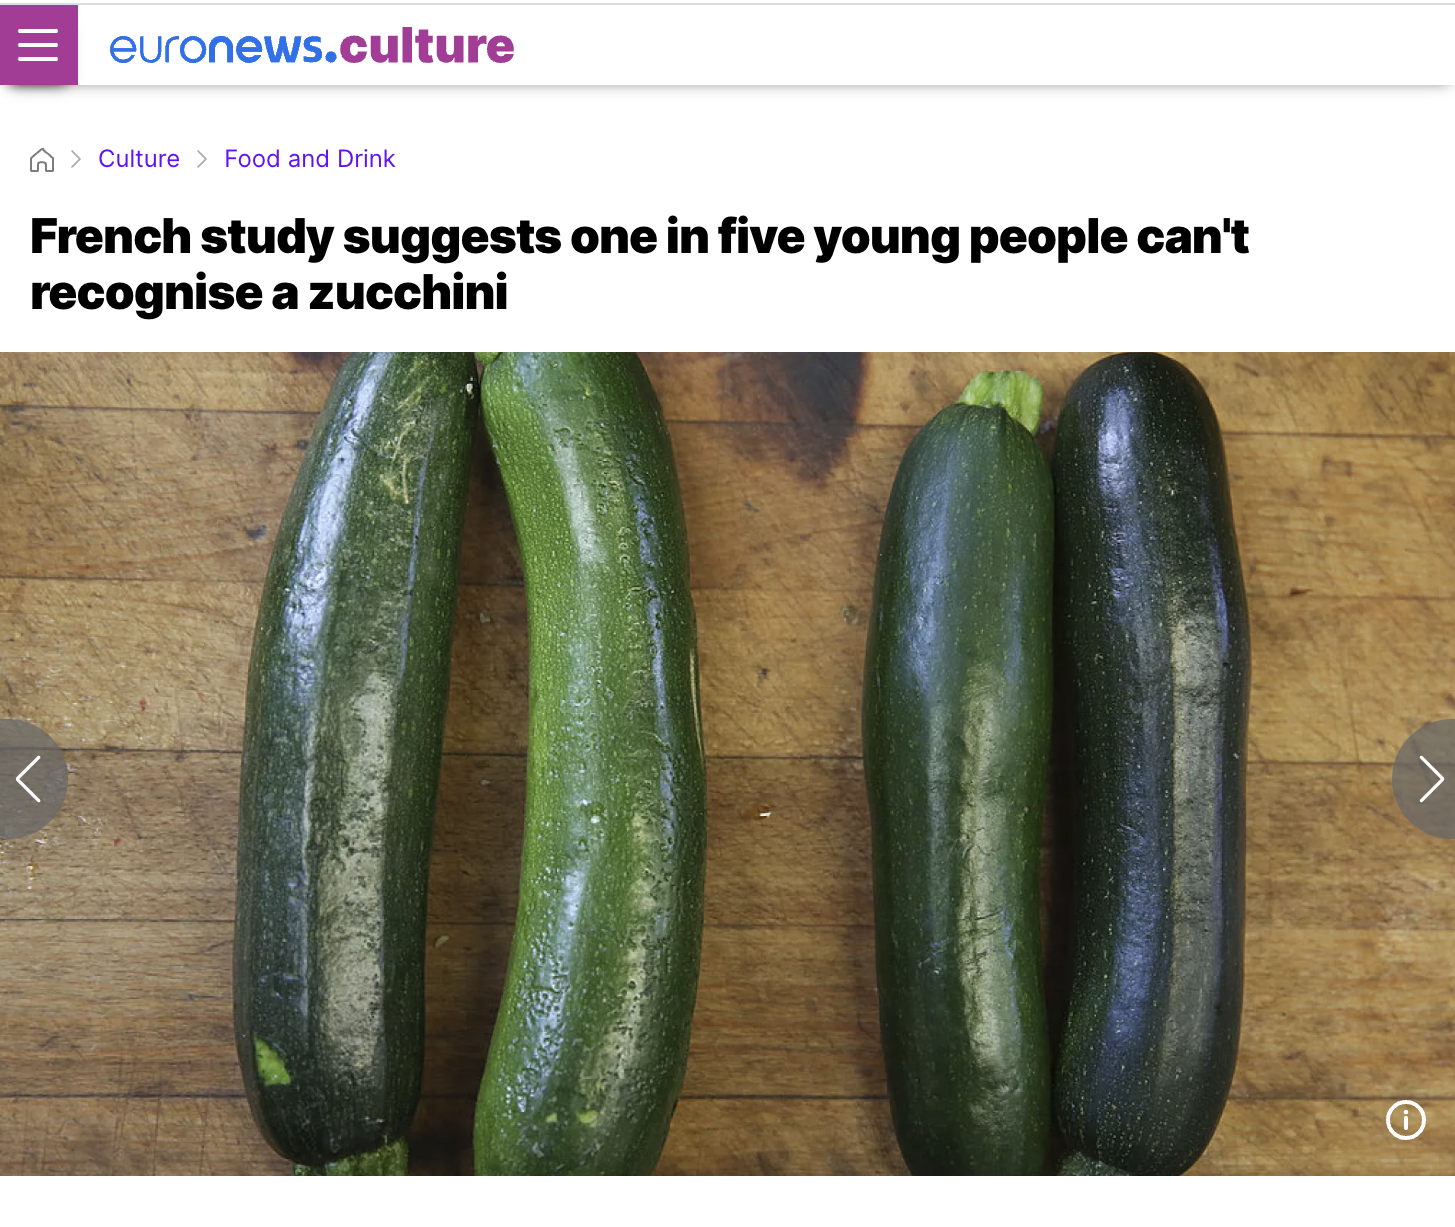 Zucchini - euronews.culture Culture Food and Drink French study suggests one in five young people can't recognise a zucchini O